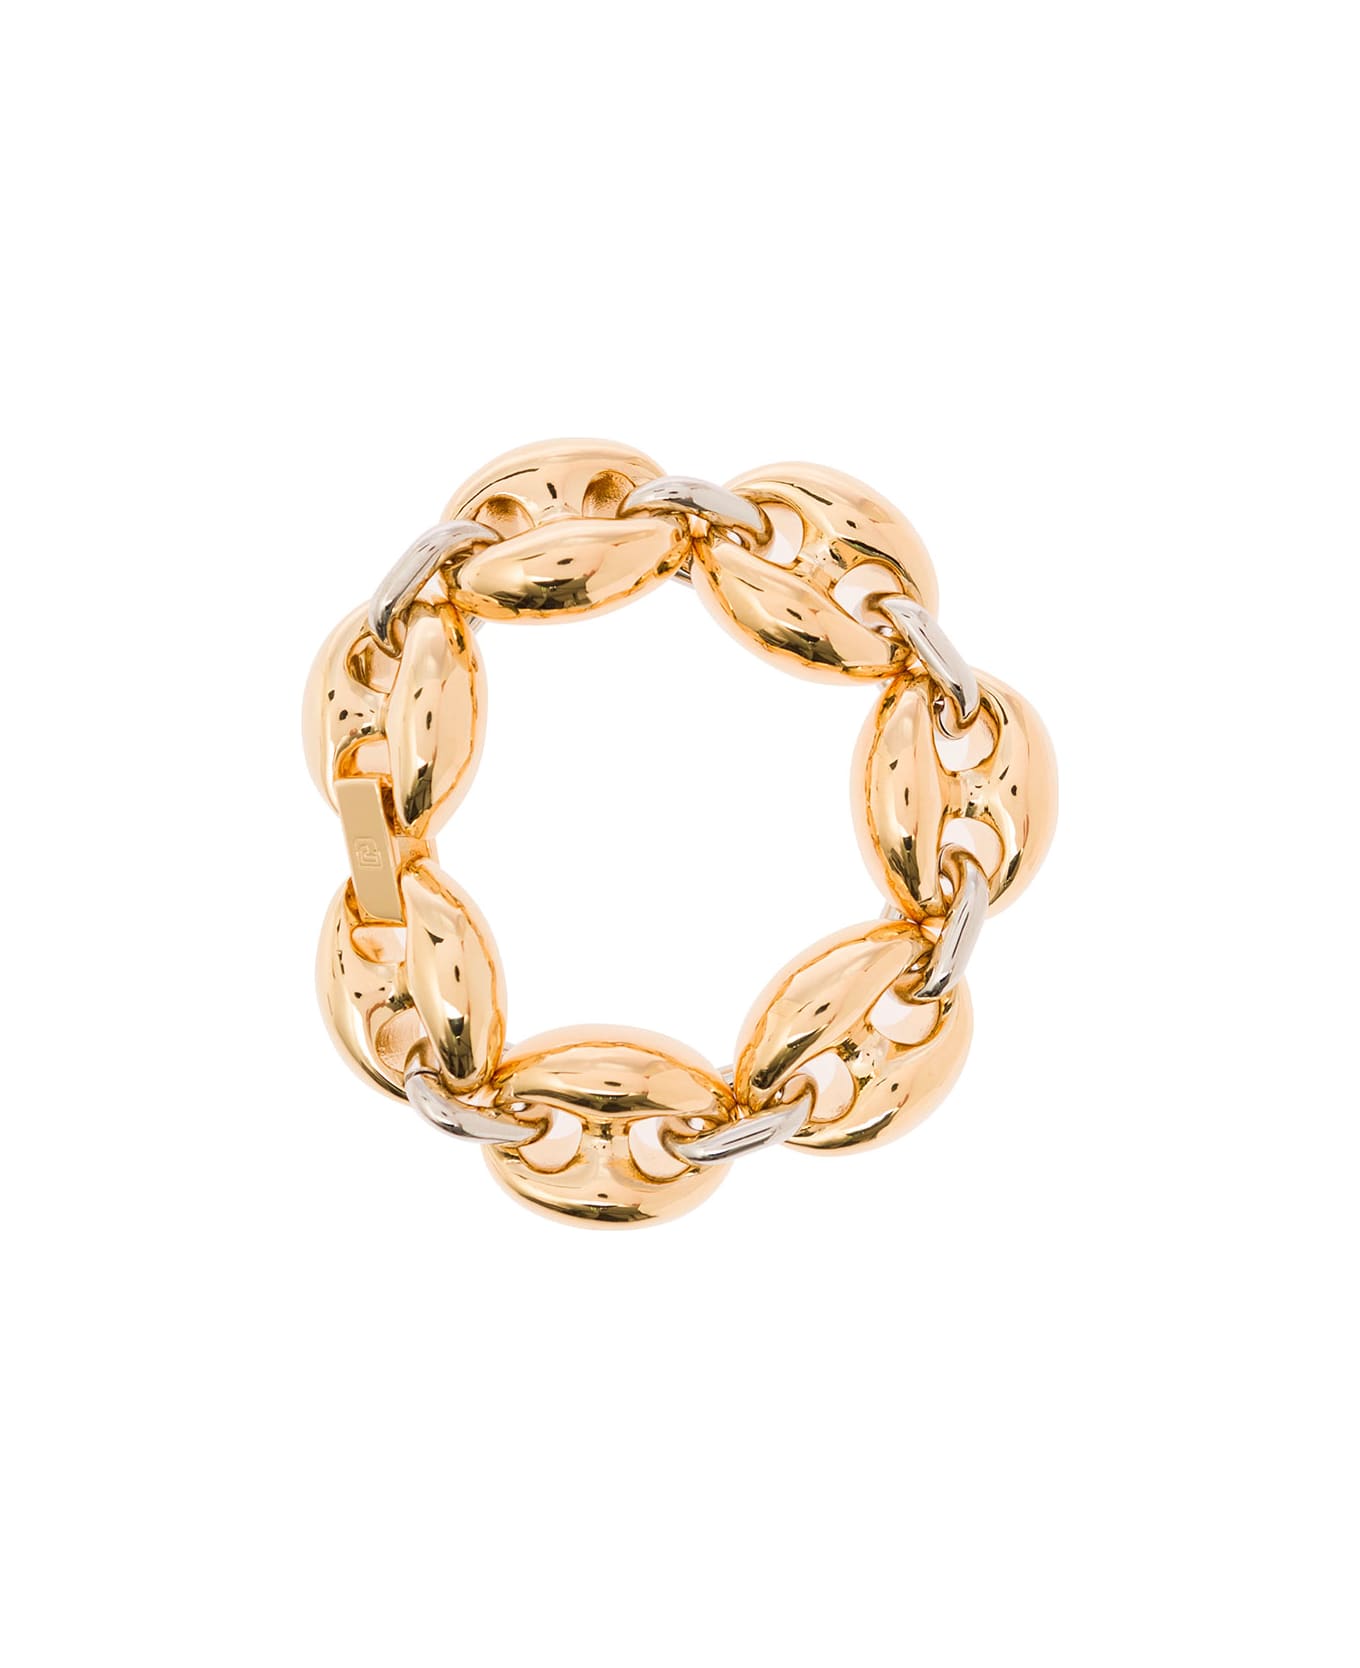 Paco Rabanne Gold And Silver Chunky Bracelet With Engraved Logo In Brass And Alluminium Woman - Golden ブレスレット